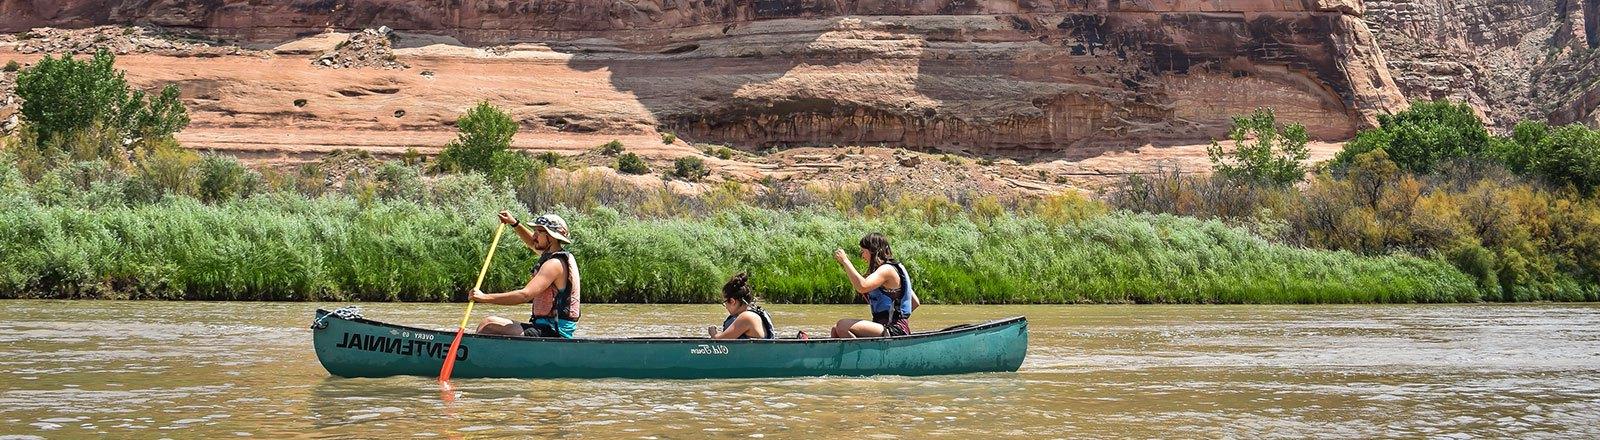 Geography students in canoe at the Colorado River